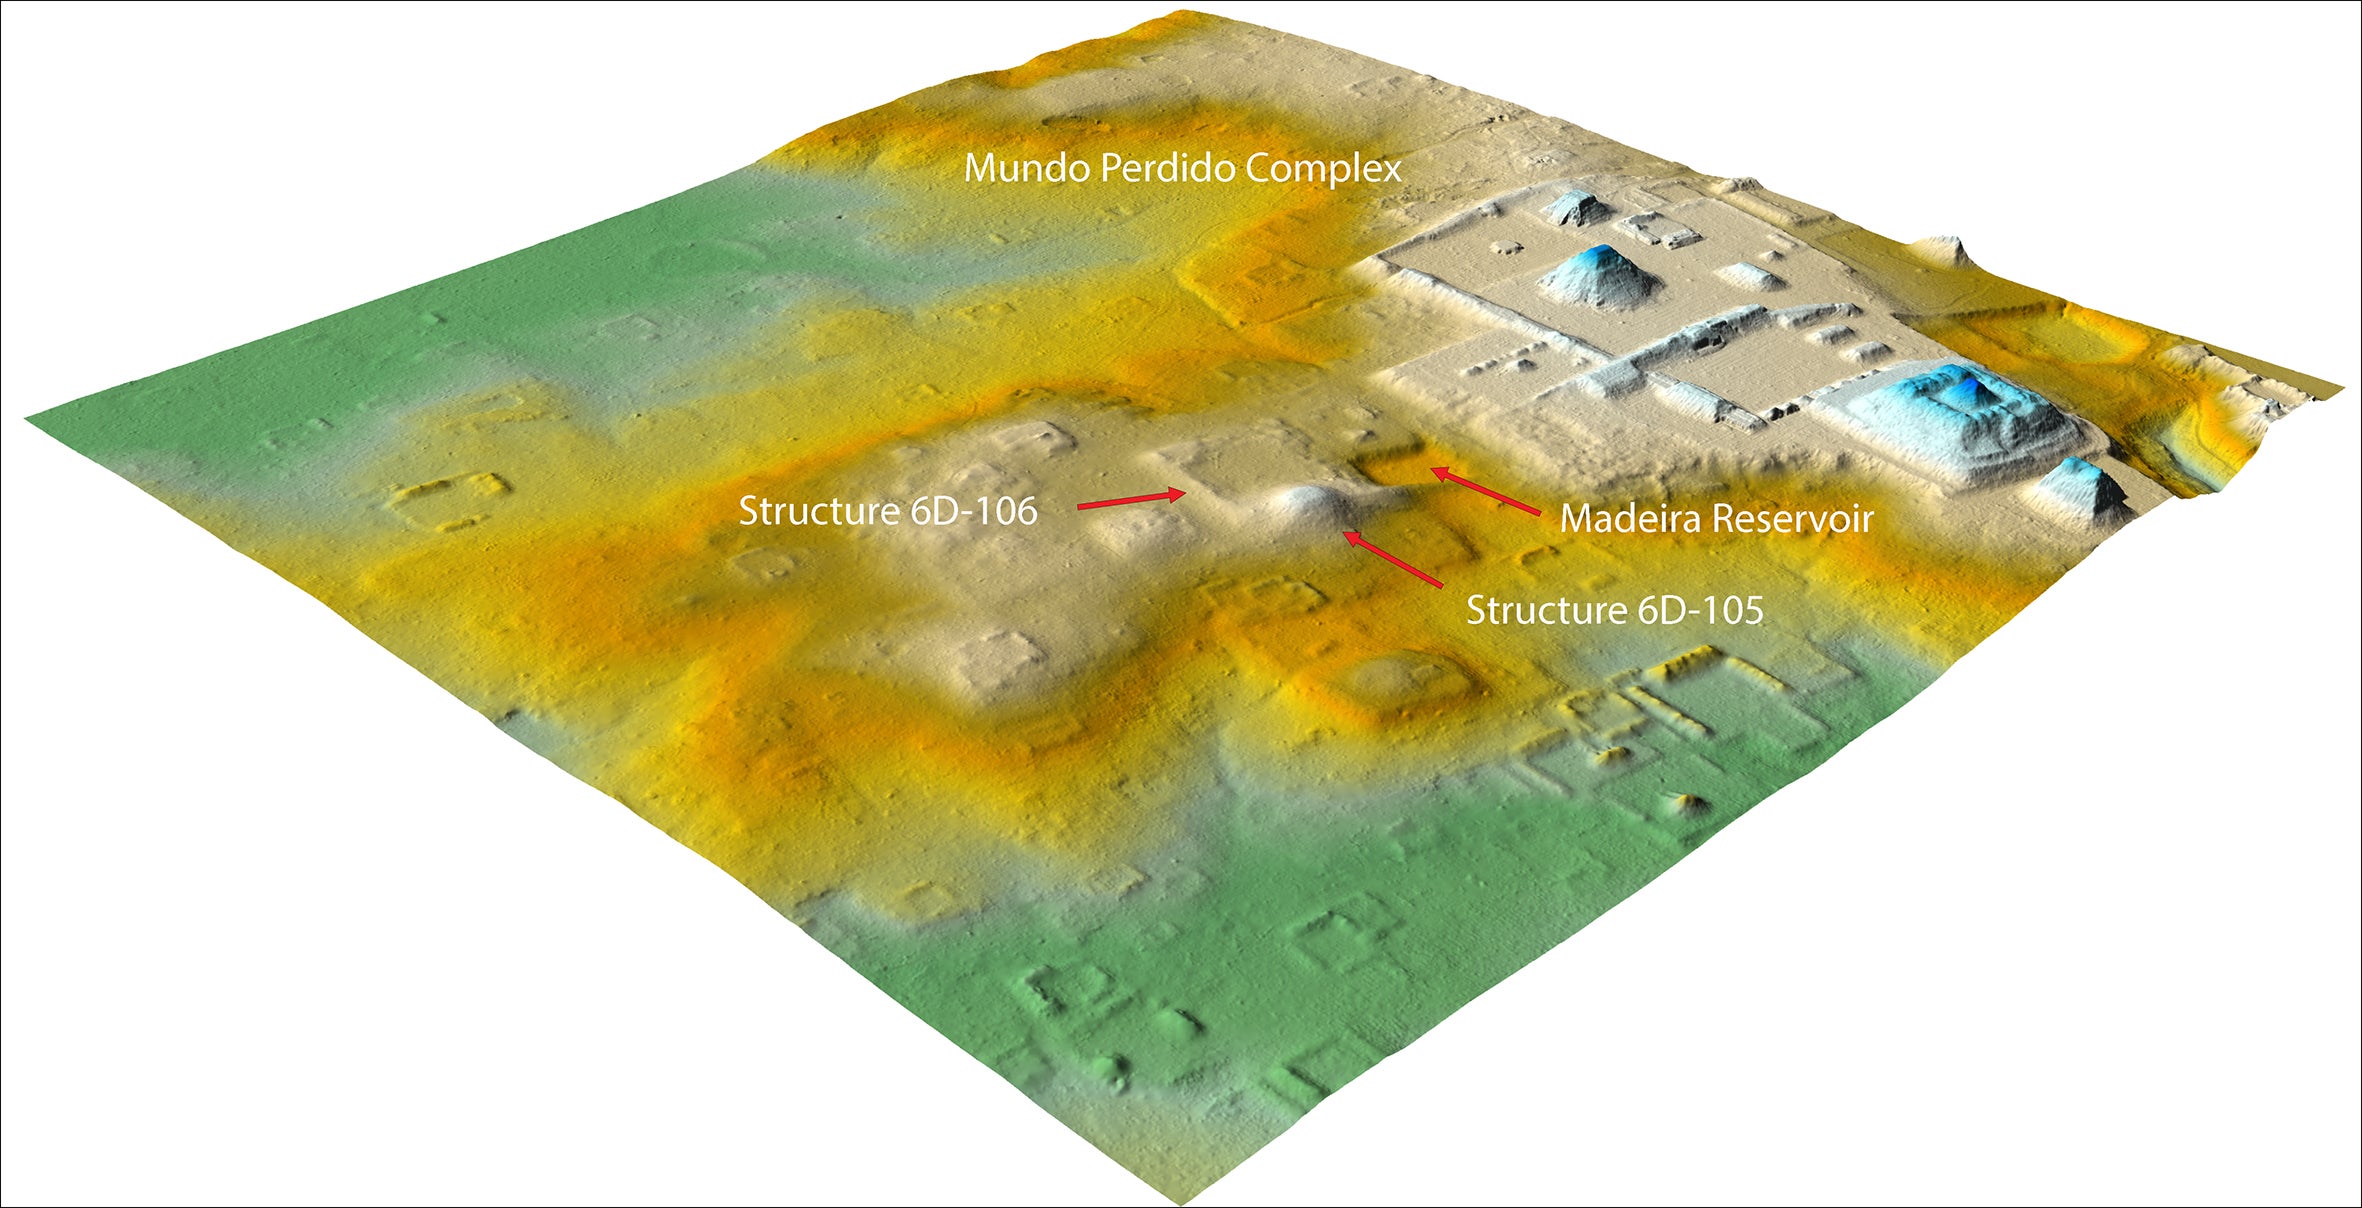 Lidar image showing the newly discovered complex. The city of Tikal is shown at top right.  (Image: T. Garrison/PACUNAM/Antiquity)